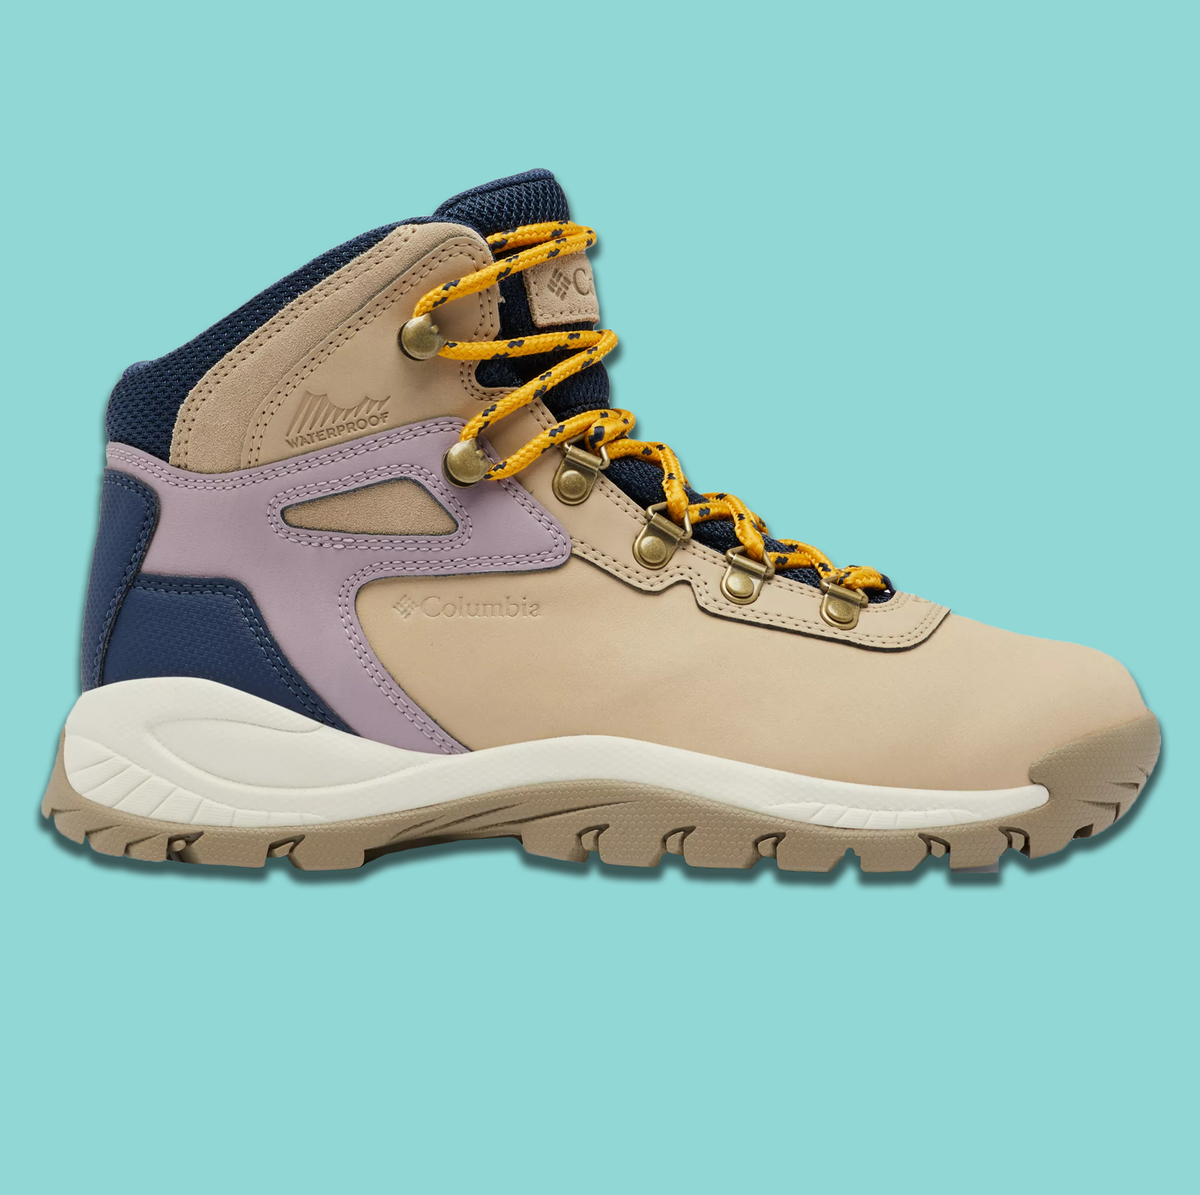 I Bought These Winter Boots For Hiking, but They're So Versatile